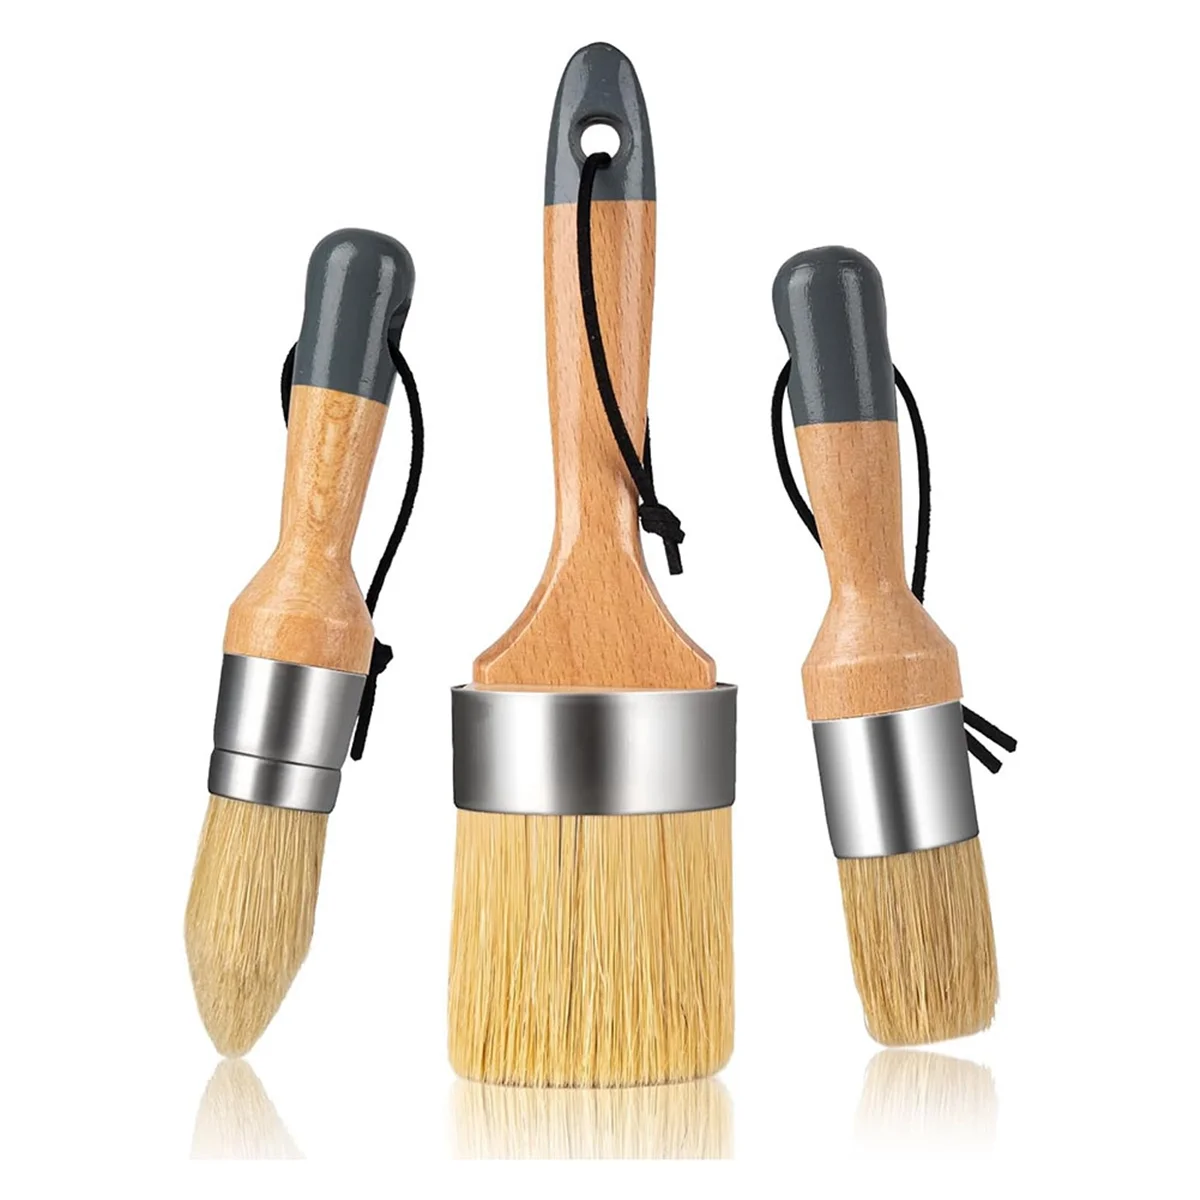 

Chalk and Wax Paint Brush Set, Chalk Paint, Milk Paint for Furniture, 1 Largeoval Brush and 2 Small Round Brushes